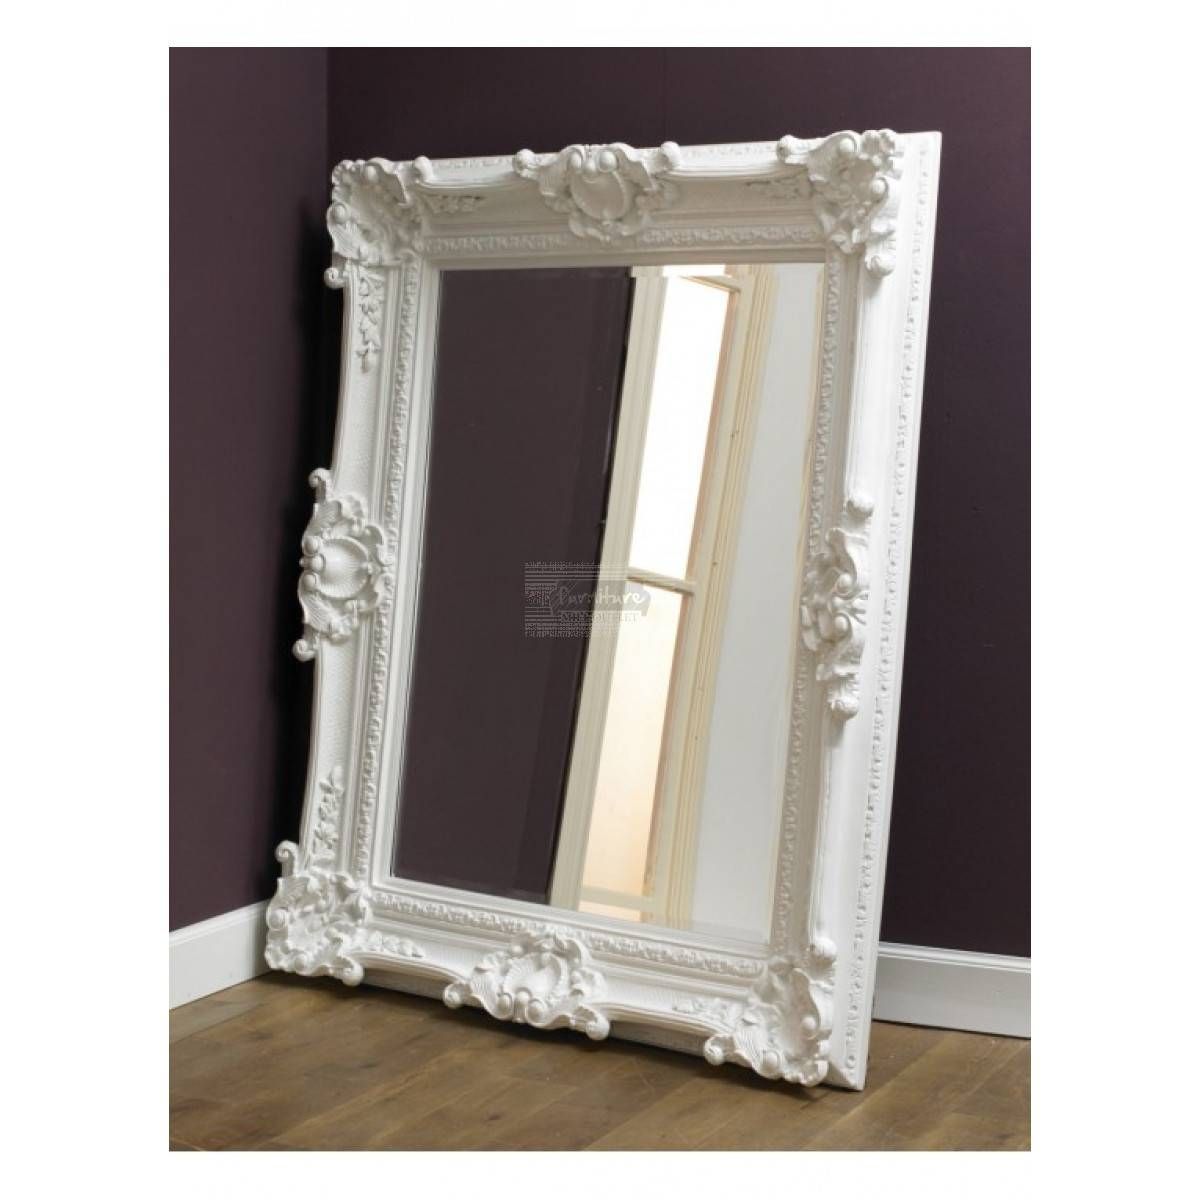 Rococo White Mirror Furniture Mill Outlet Intended For White Rococo Mirrors (View 19 of 25)